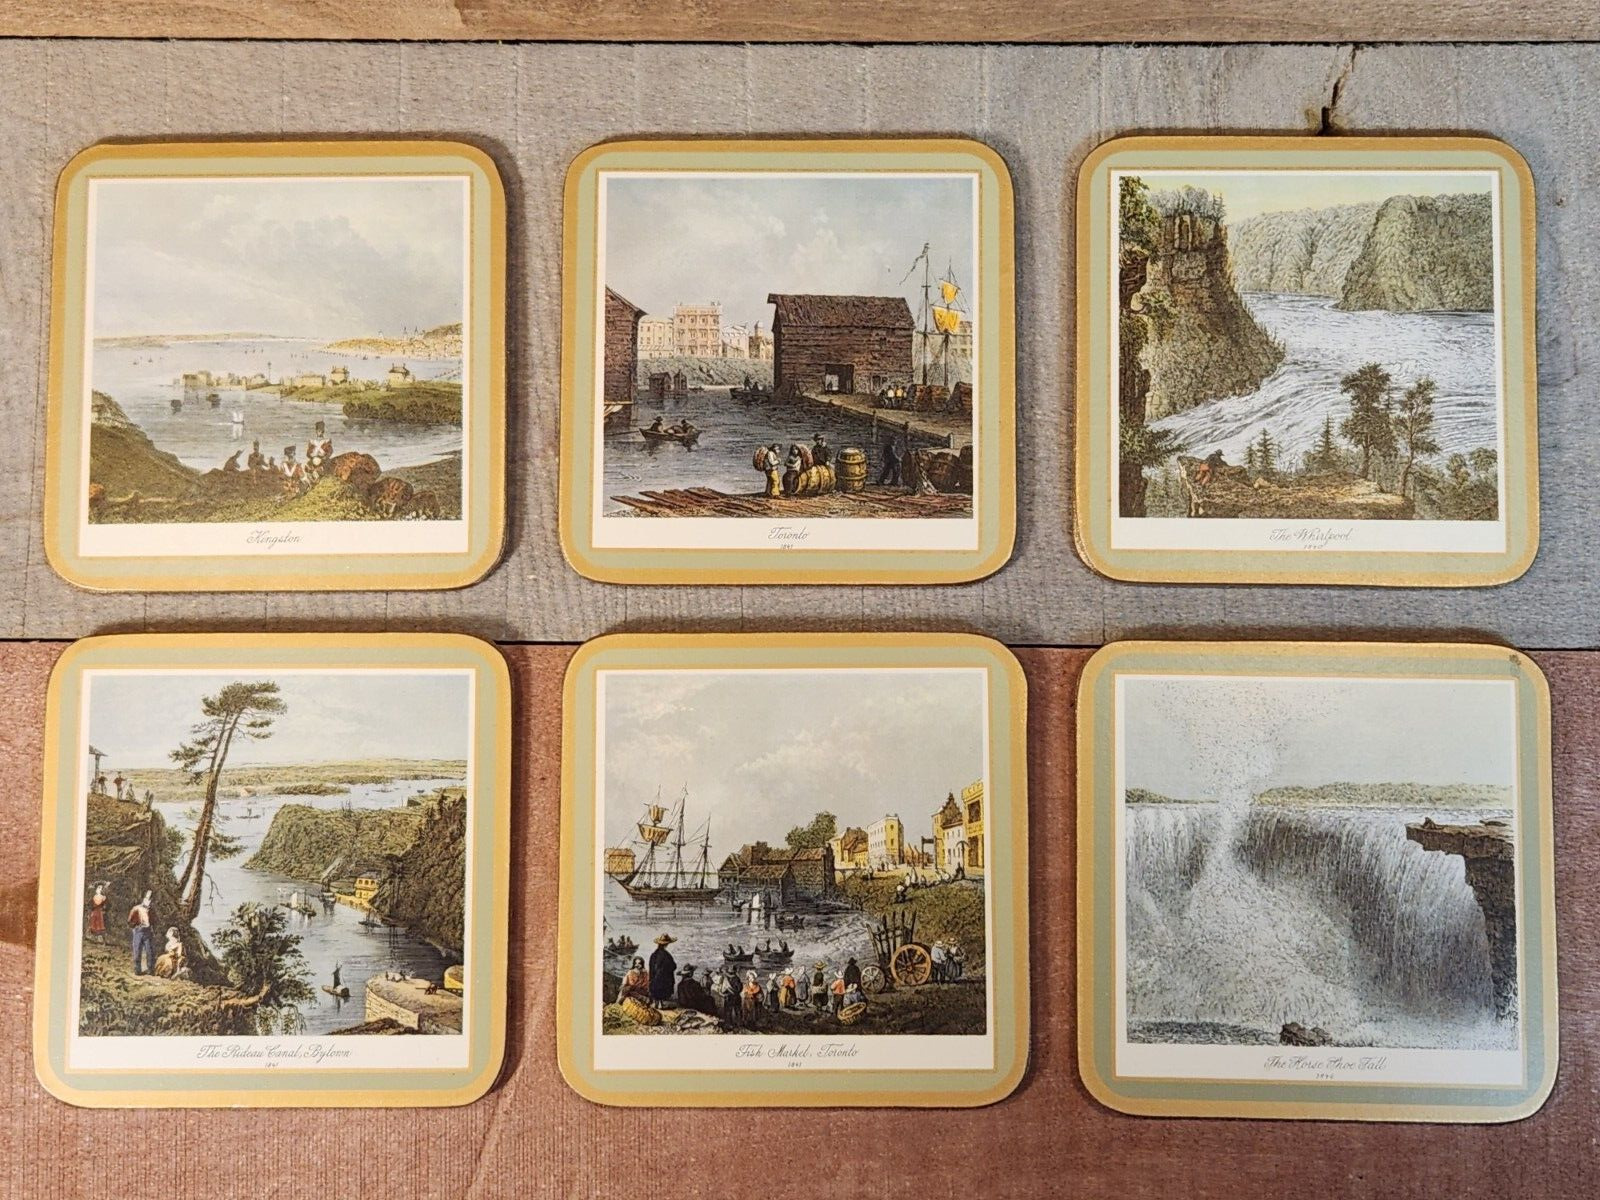 Vintage Pimpernel Coasters Ontario Canada Set of 6 Cork Backed Made in the UK